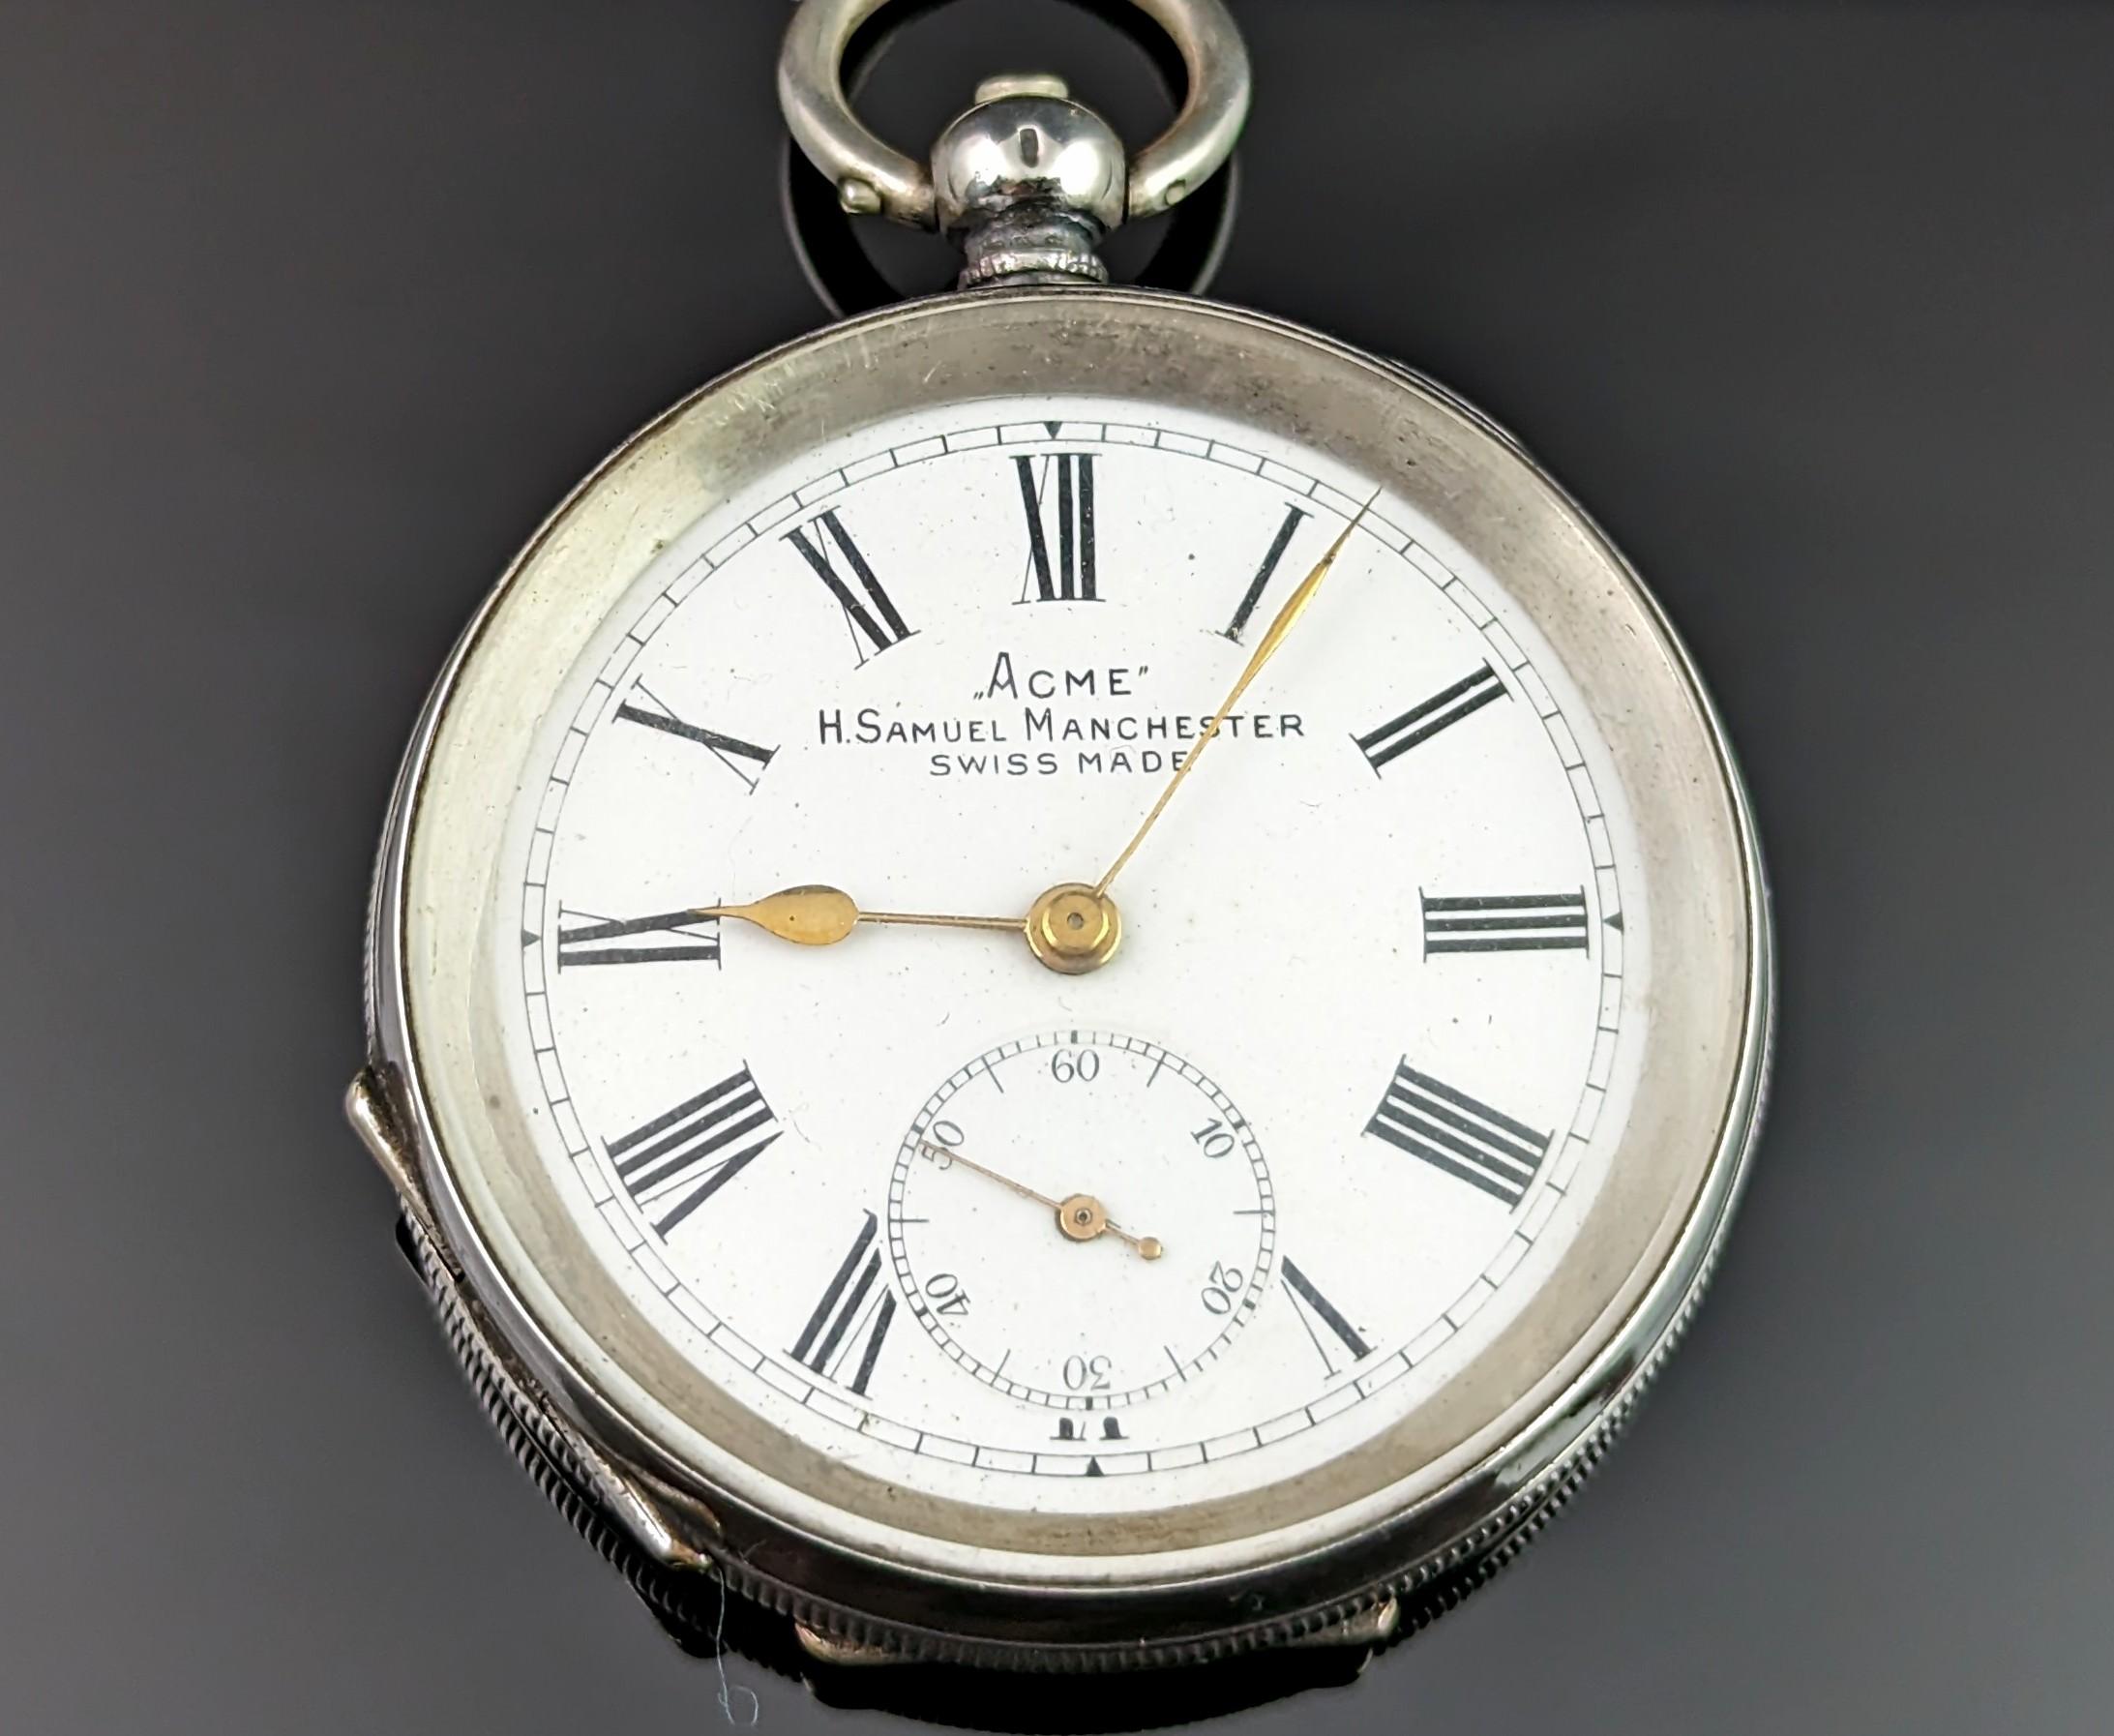 This handsome antique fine silver cased pocket watch would make a wonderful gift!

The case is marked with the Swiss three Bears mark for 935 silver or fine silver, it has a Swiss made movement, imported to the UK for H Samuel Manchester, the watch